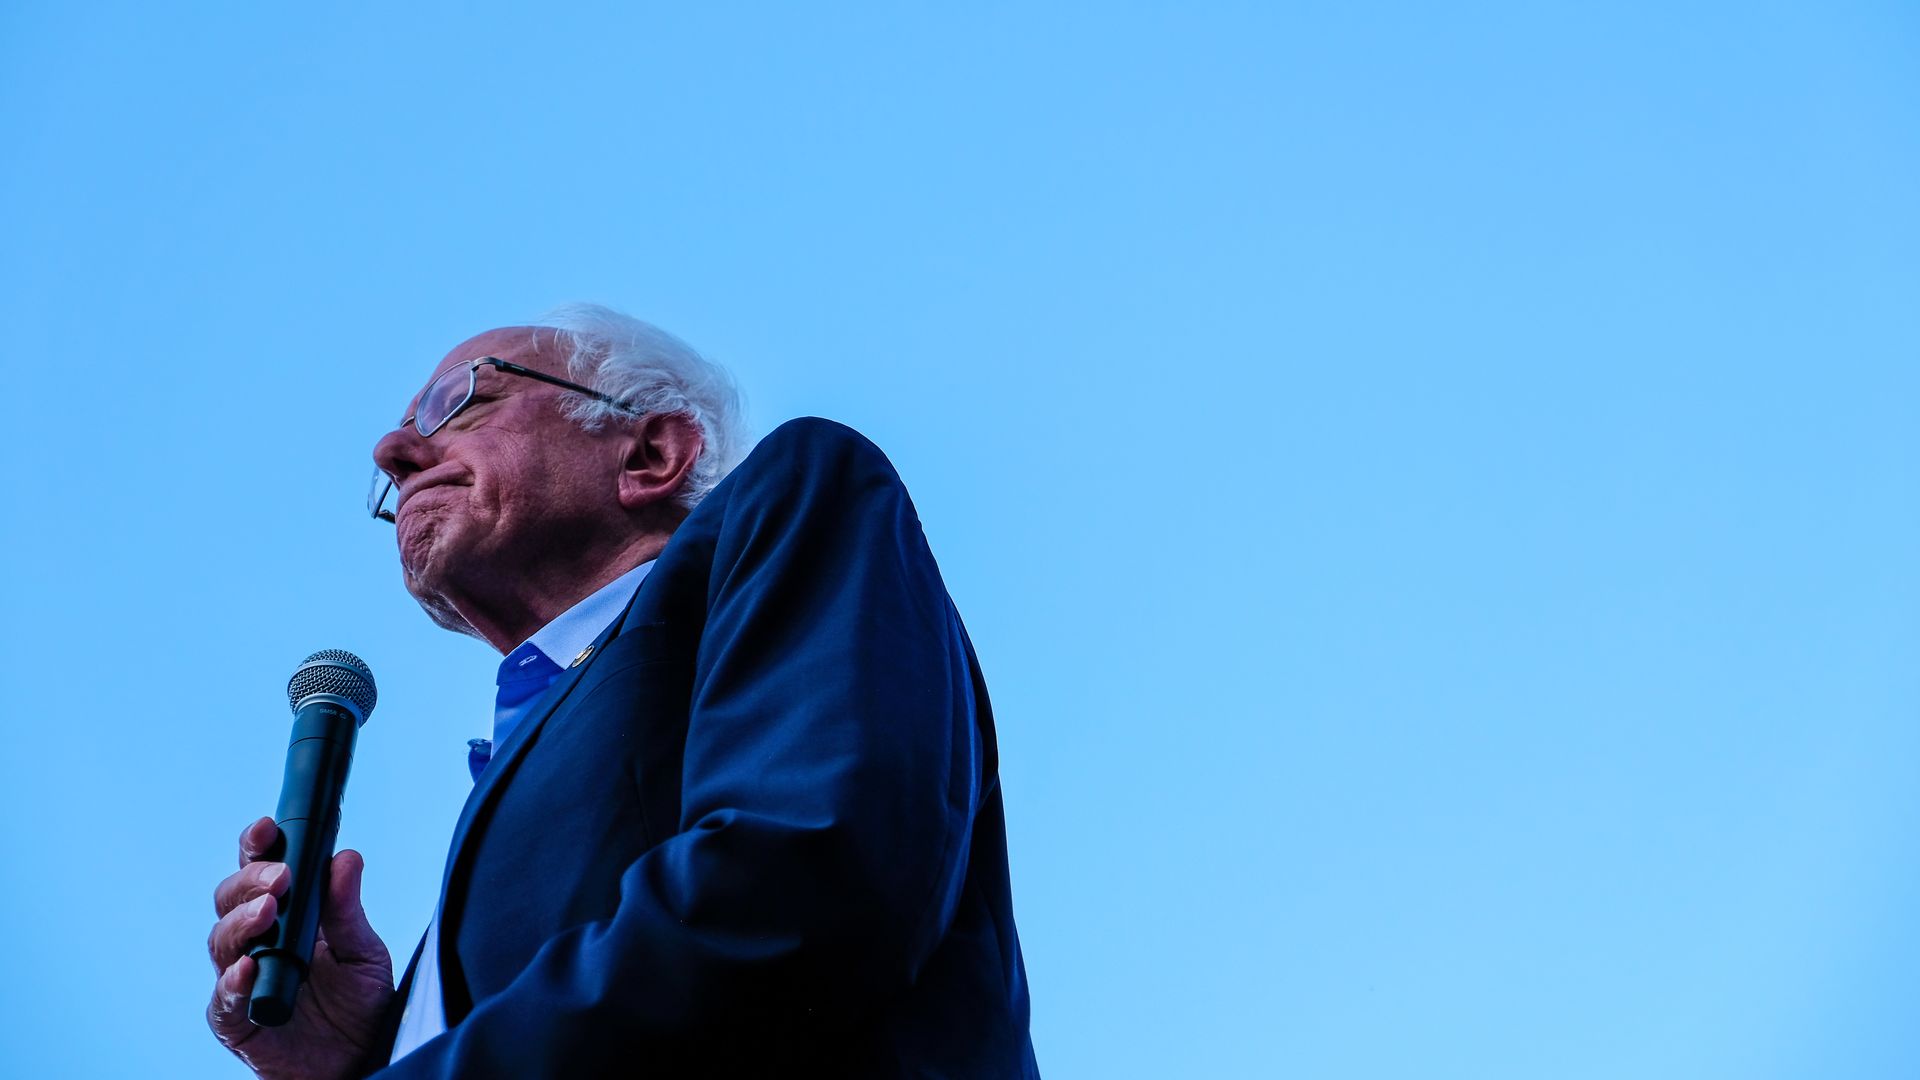 In this image, the camera looks sharply up at Bernie as he holds a microphone and stands under a clear blue sky.